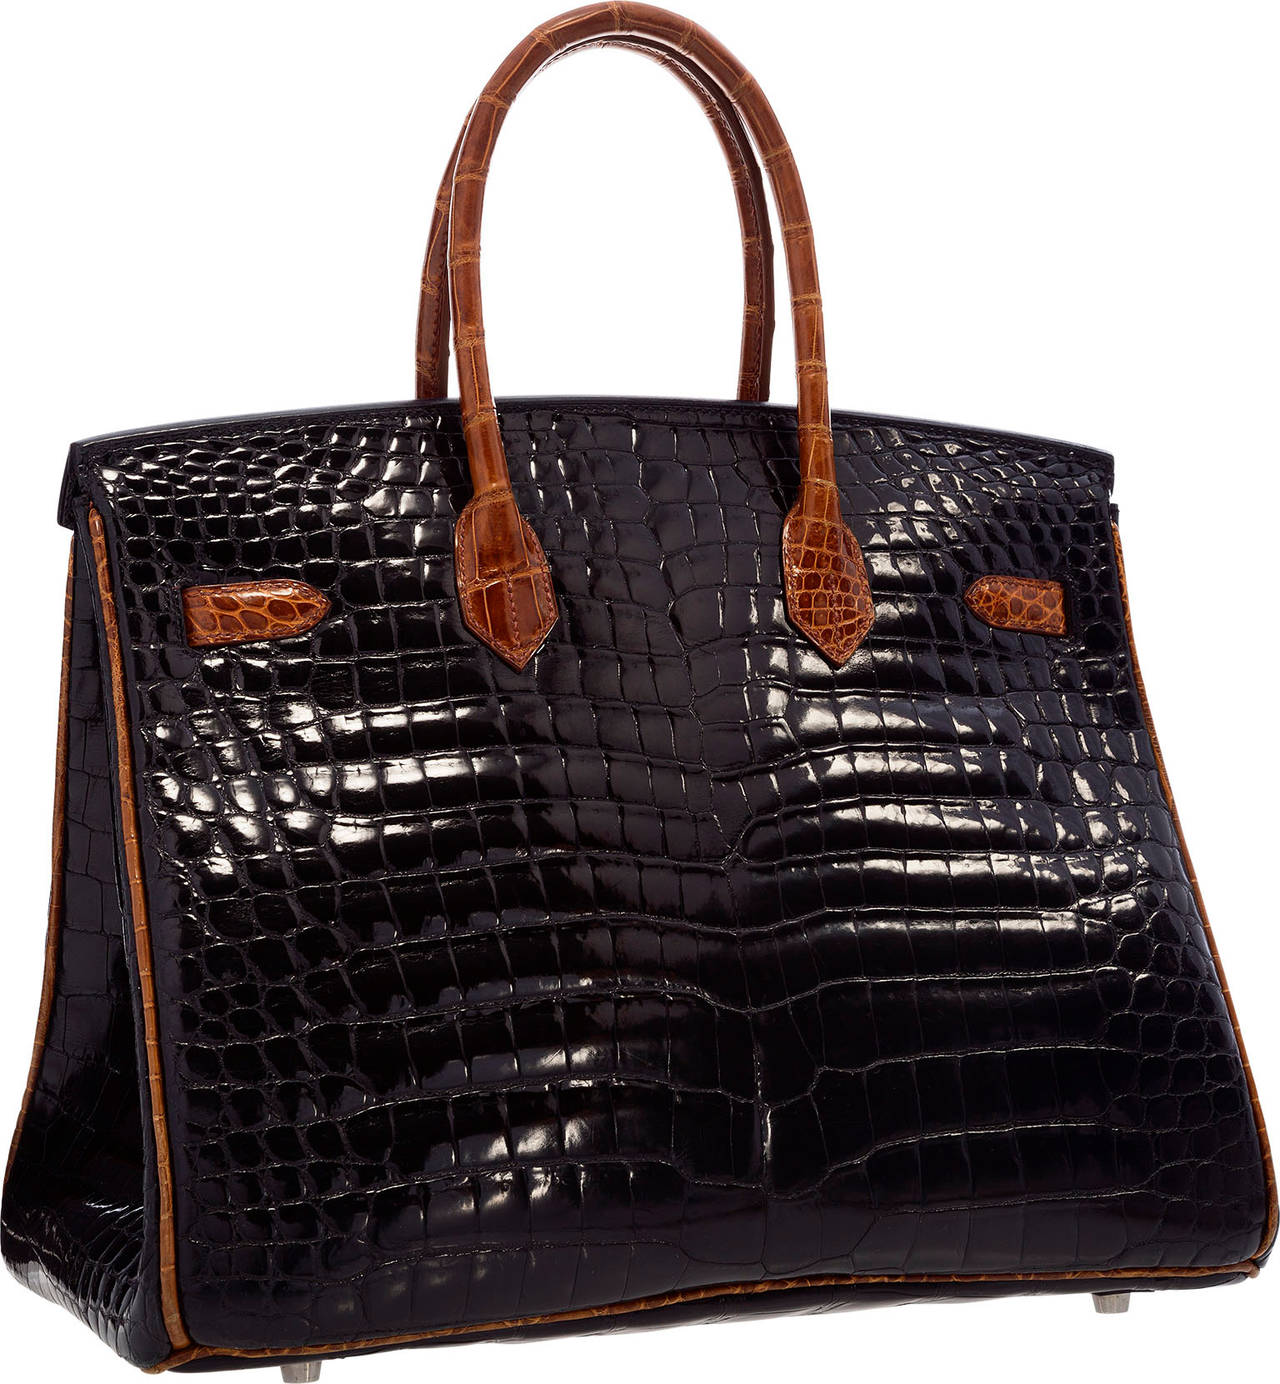 Hermes Limited Edition 35cm Shiny Black Crocodile Birkin Ruthenium Hardware In Good Condition For Sale In New York, NY